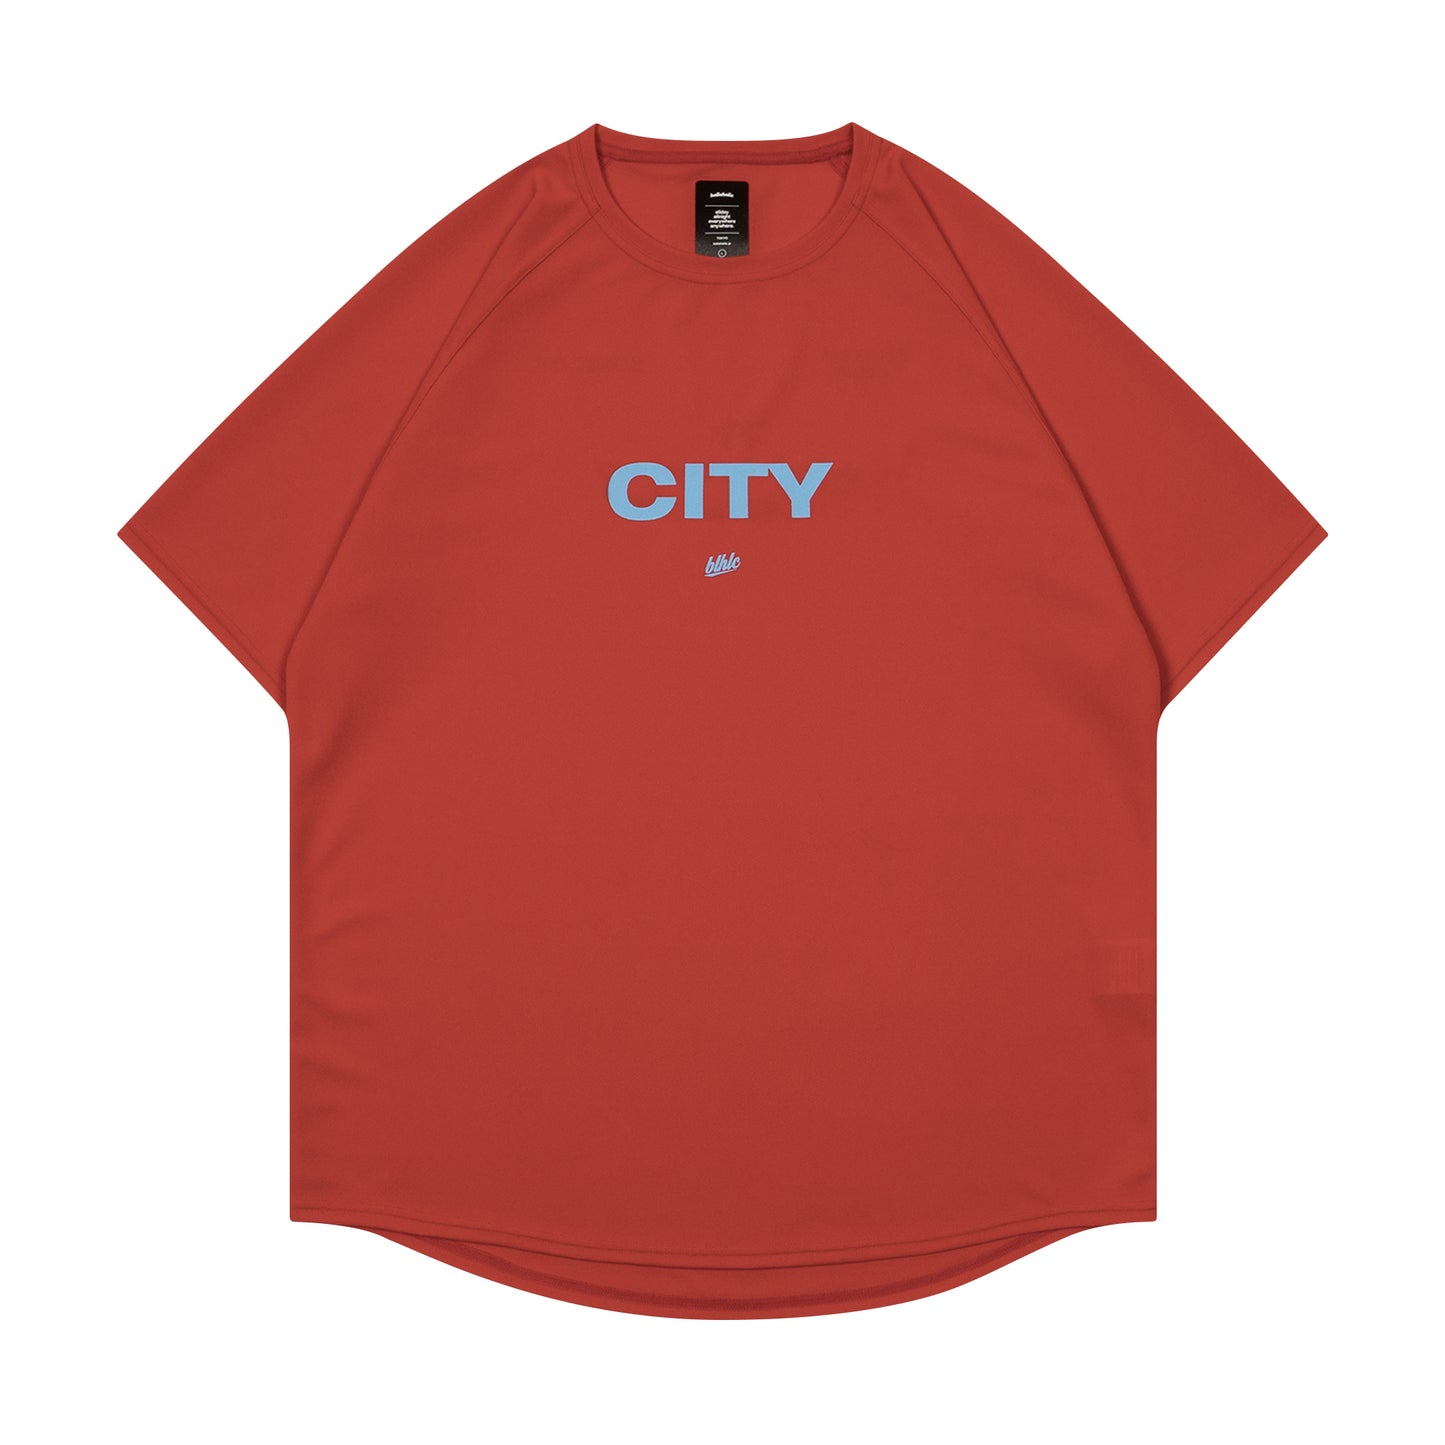 MY CITY Cool Tee (red)